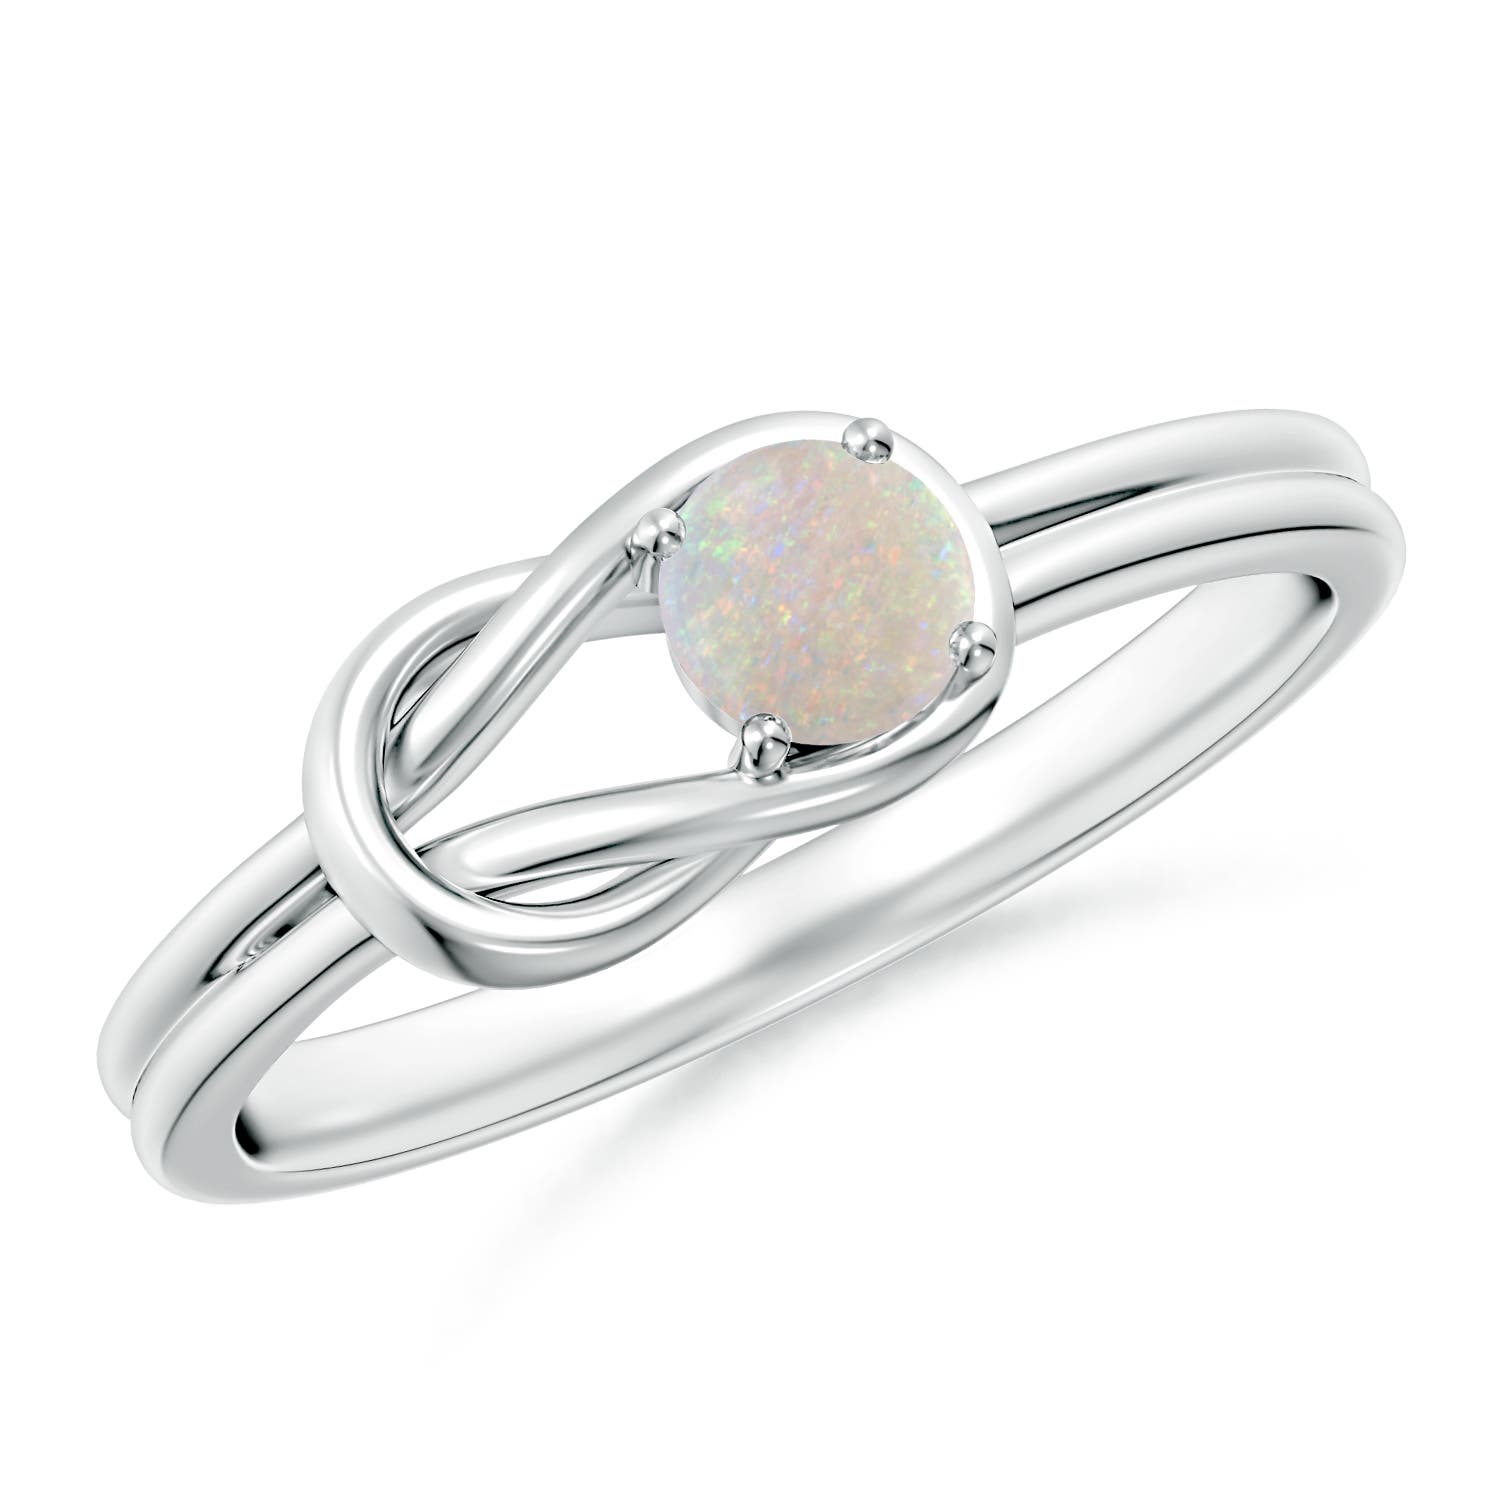 AA - Opal / 0.16 CT / 14 KT White Gold